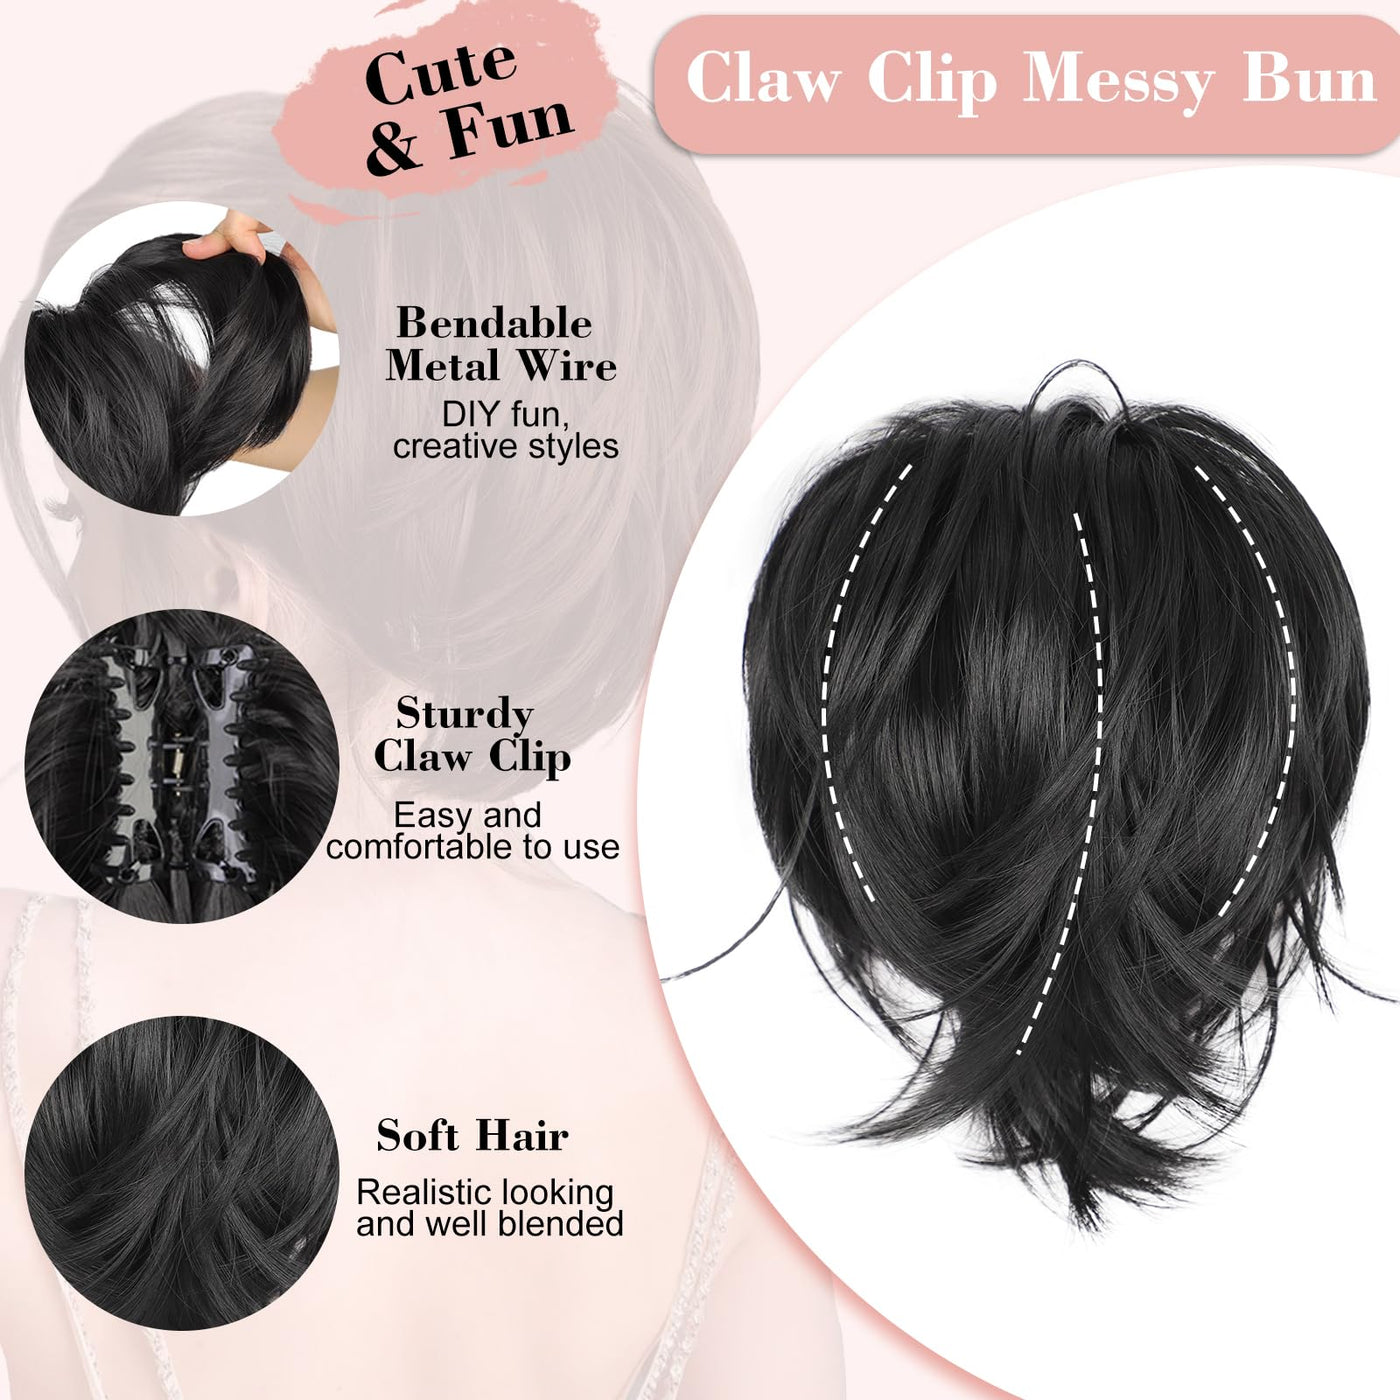 CloudEase Claw Clip Messy Bun Hair Piece Short Ponytail Extension with 3 Bendable Metals Wires Synthetic Fake Hair Bun Hair Pieces for Women DIY Full Easy Bun